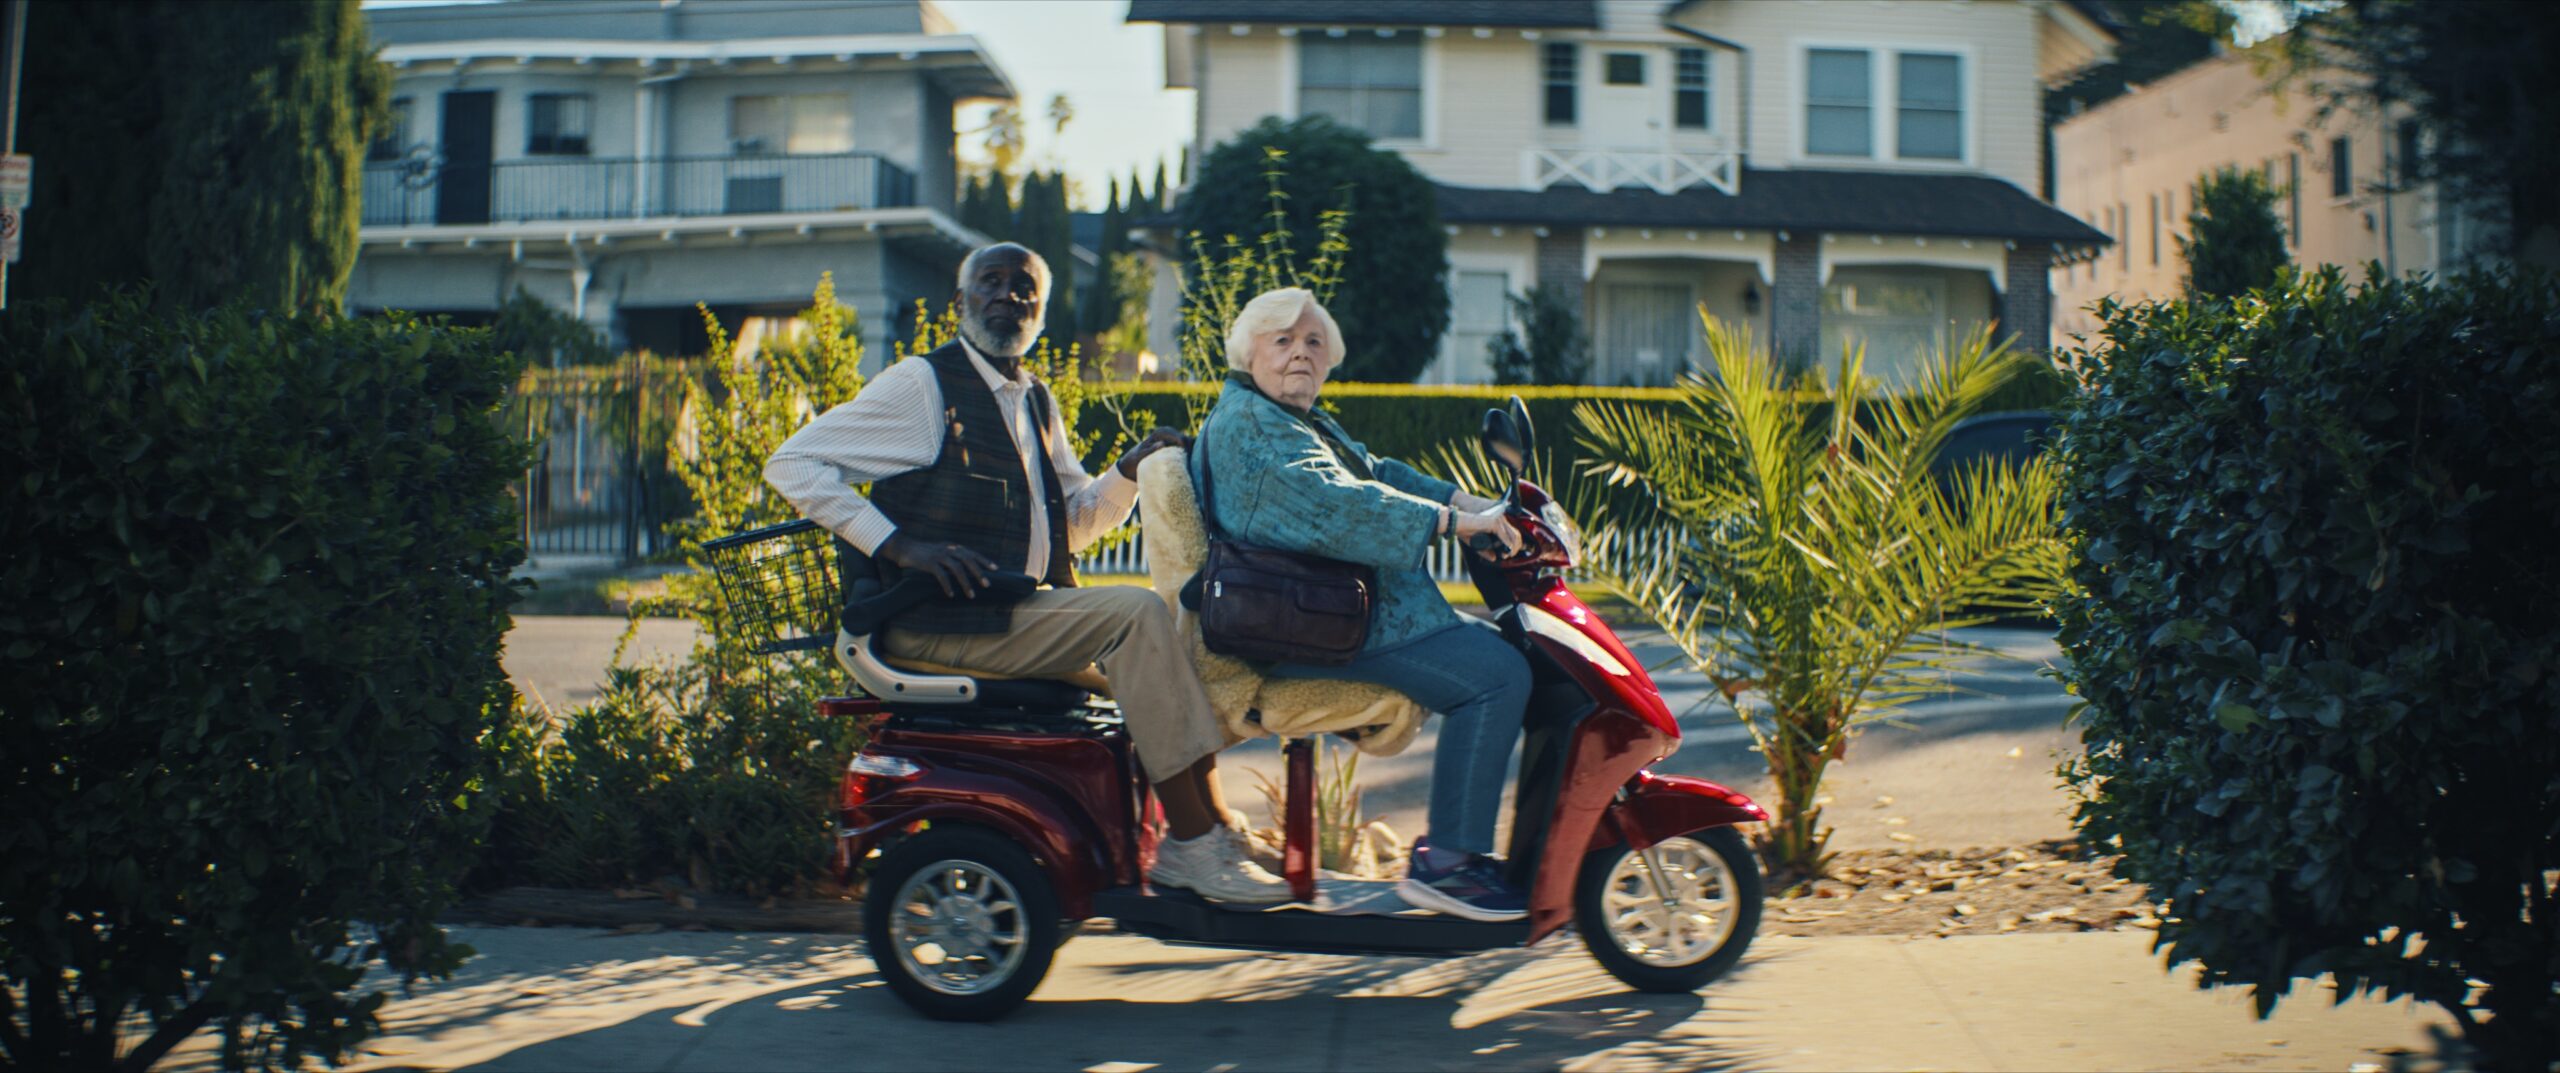 June Squibb and Richard Roundtree in THELMA